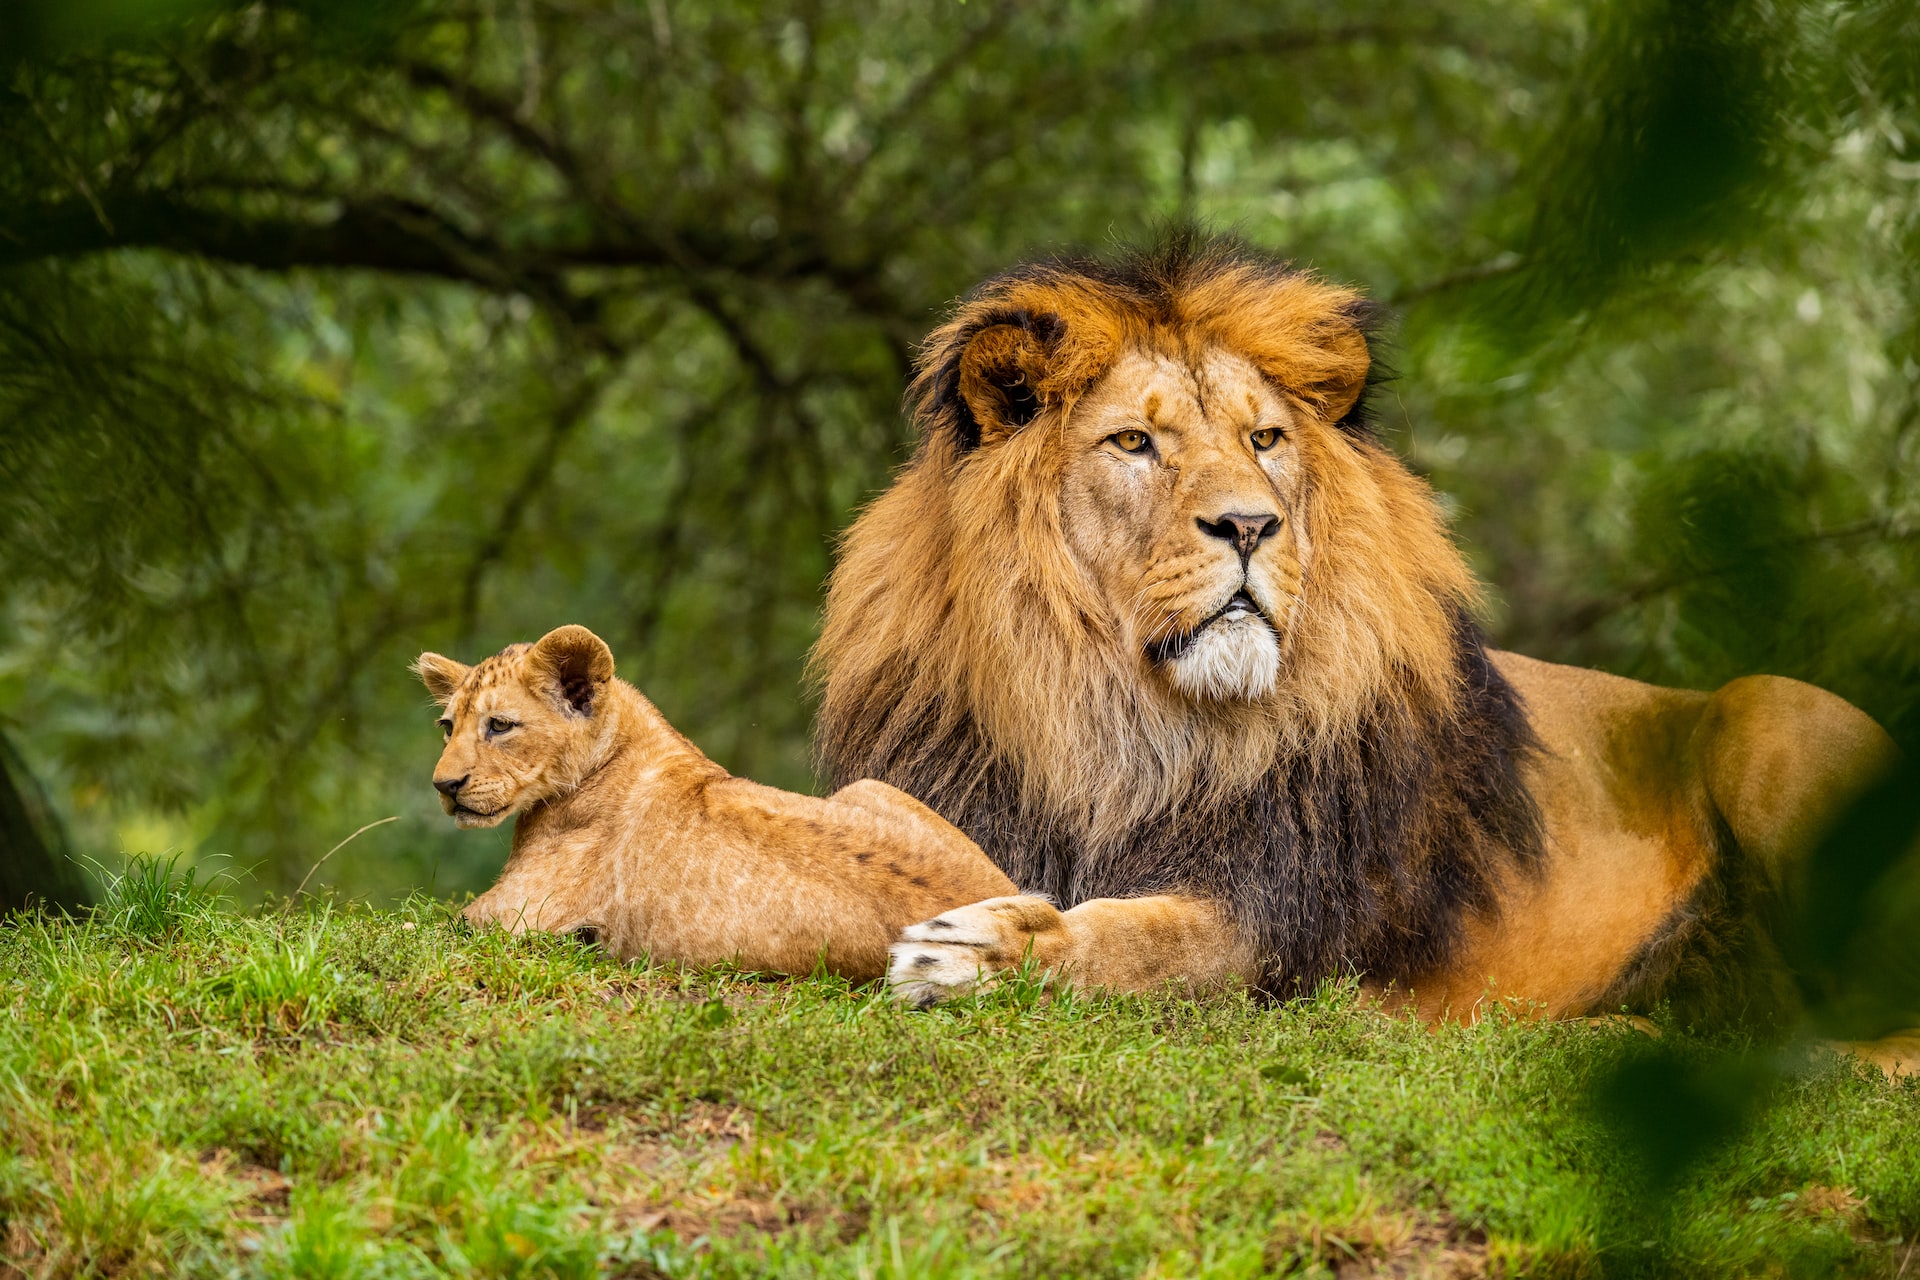 Lion-tastic: The Fascinating World of the King of the Jungle